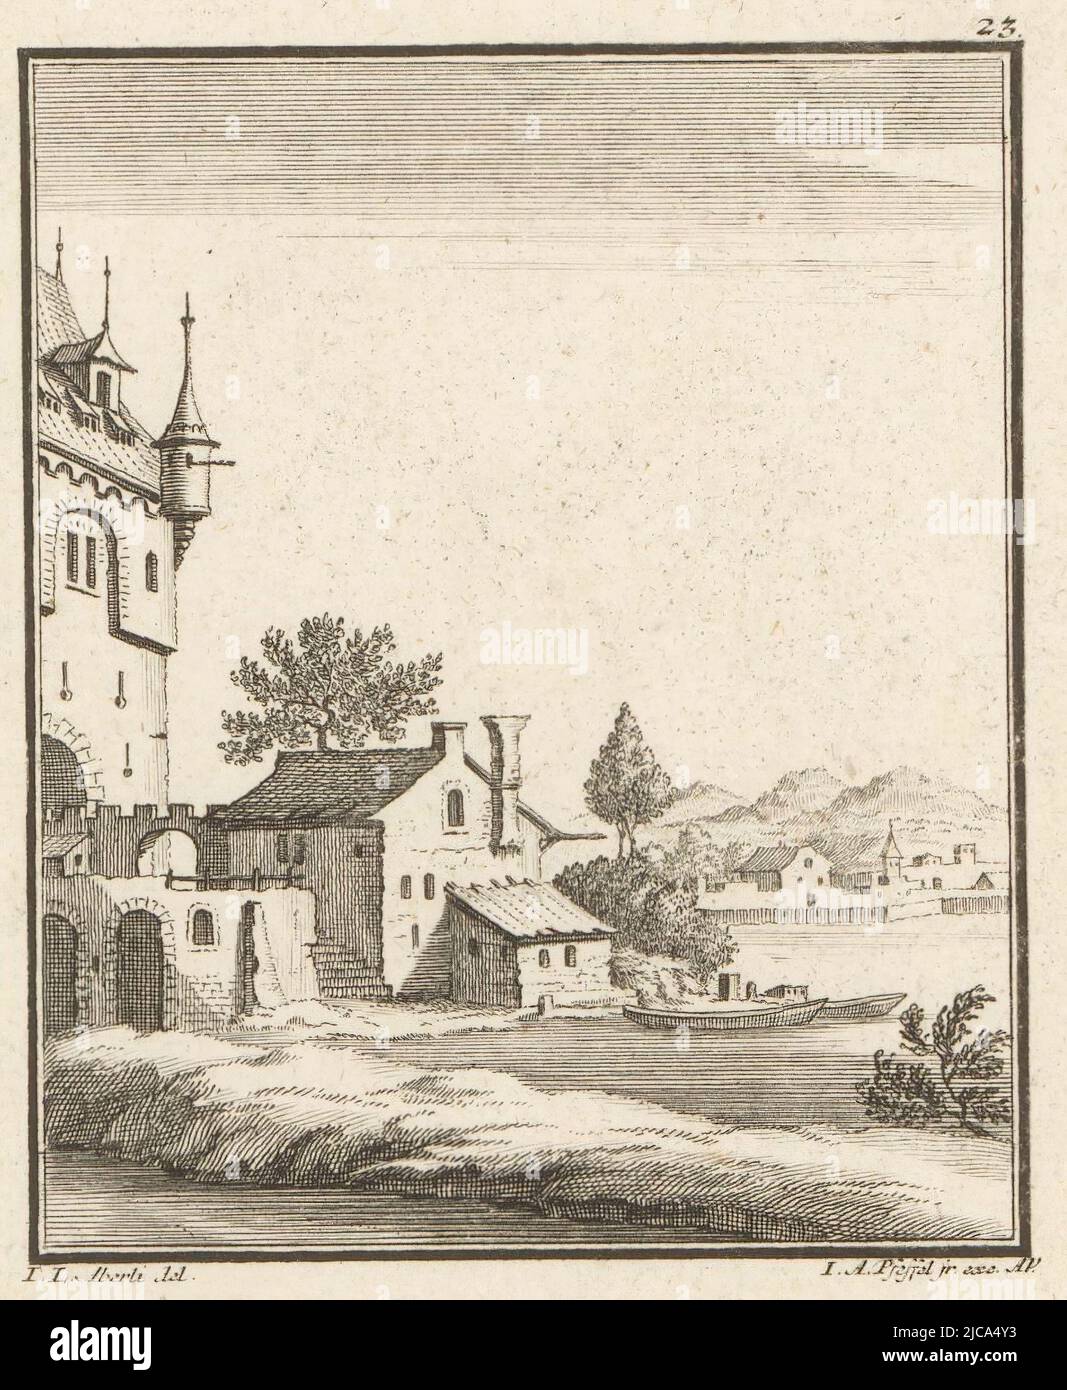 Top right printed number 23, print maker: Johann Andreas Pfeffel (der Jüngere), (mentioned on object), intermediary draughtsman: Johann Ludwig Aberli, (mentioned on object), 1725 - 1768, paper, etching, h 117 mm - w 99 mm Stock Photo